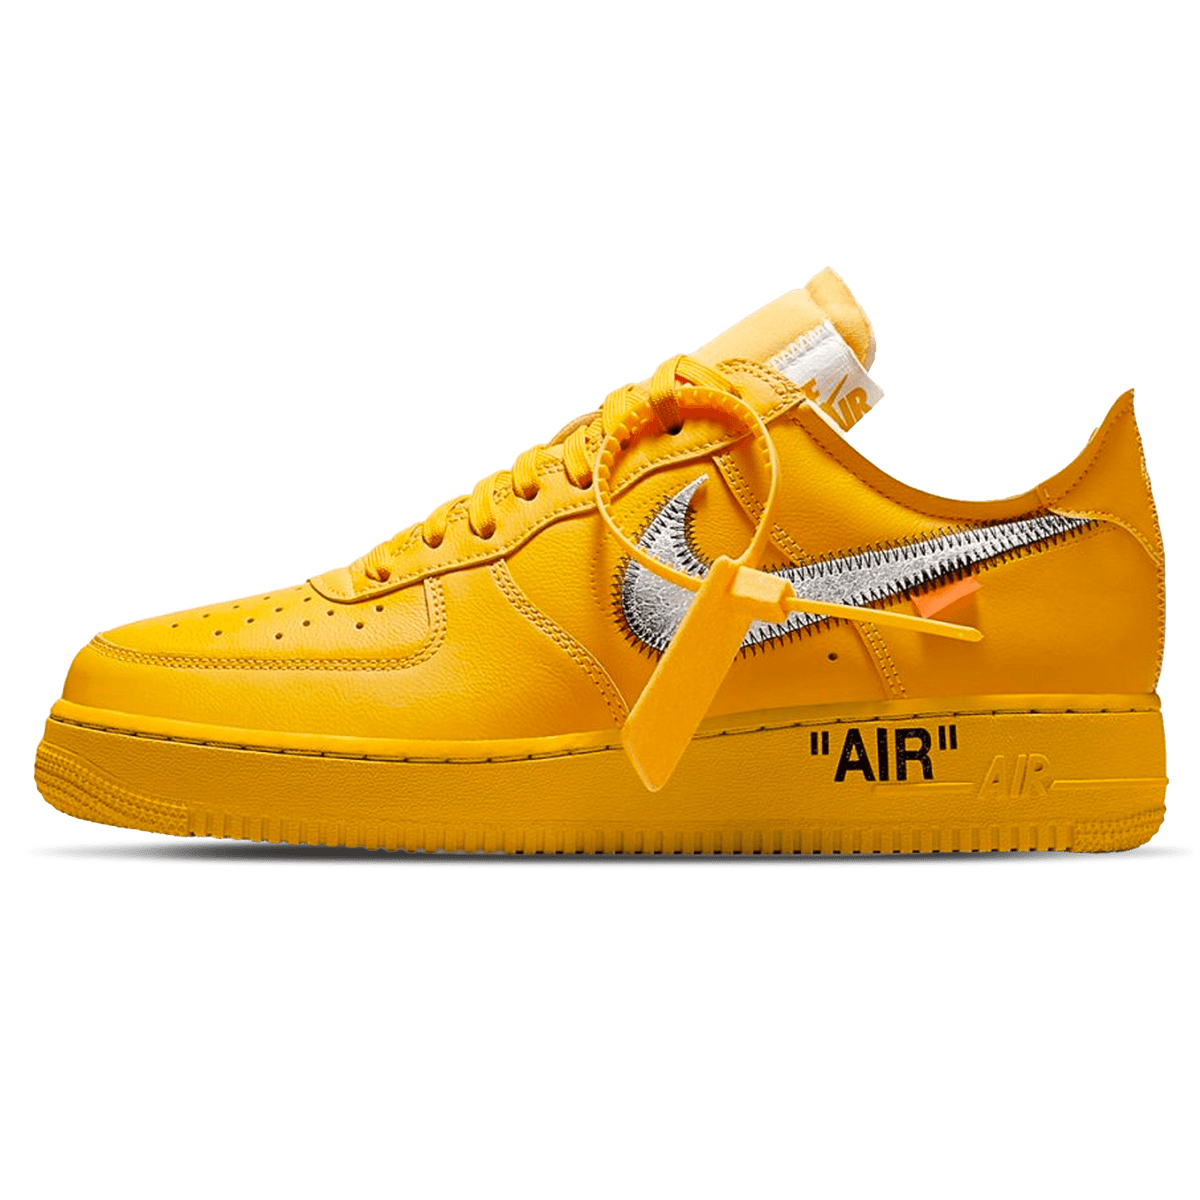 Off-White x timberland 6 inch complementary colour boots for mens Low ‘Lemonade’ - UrlfreezeShops